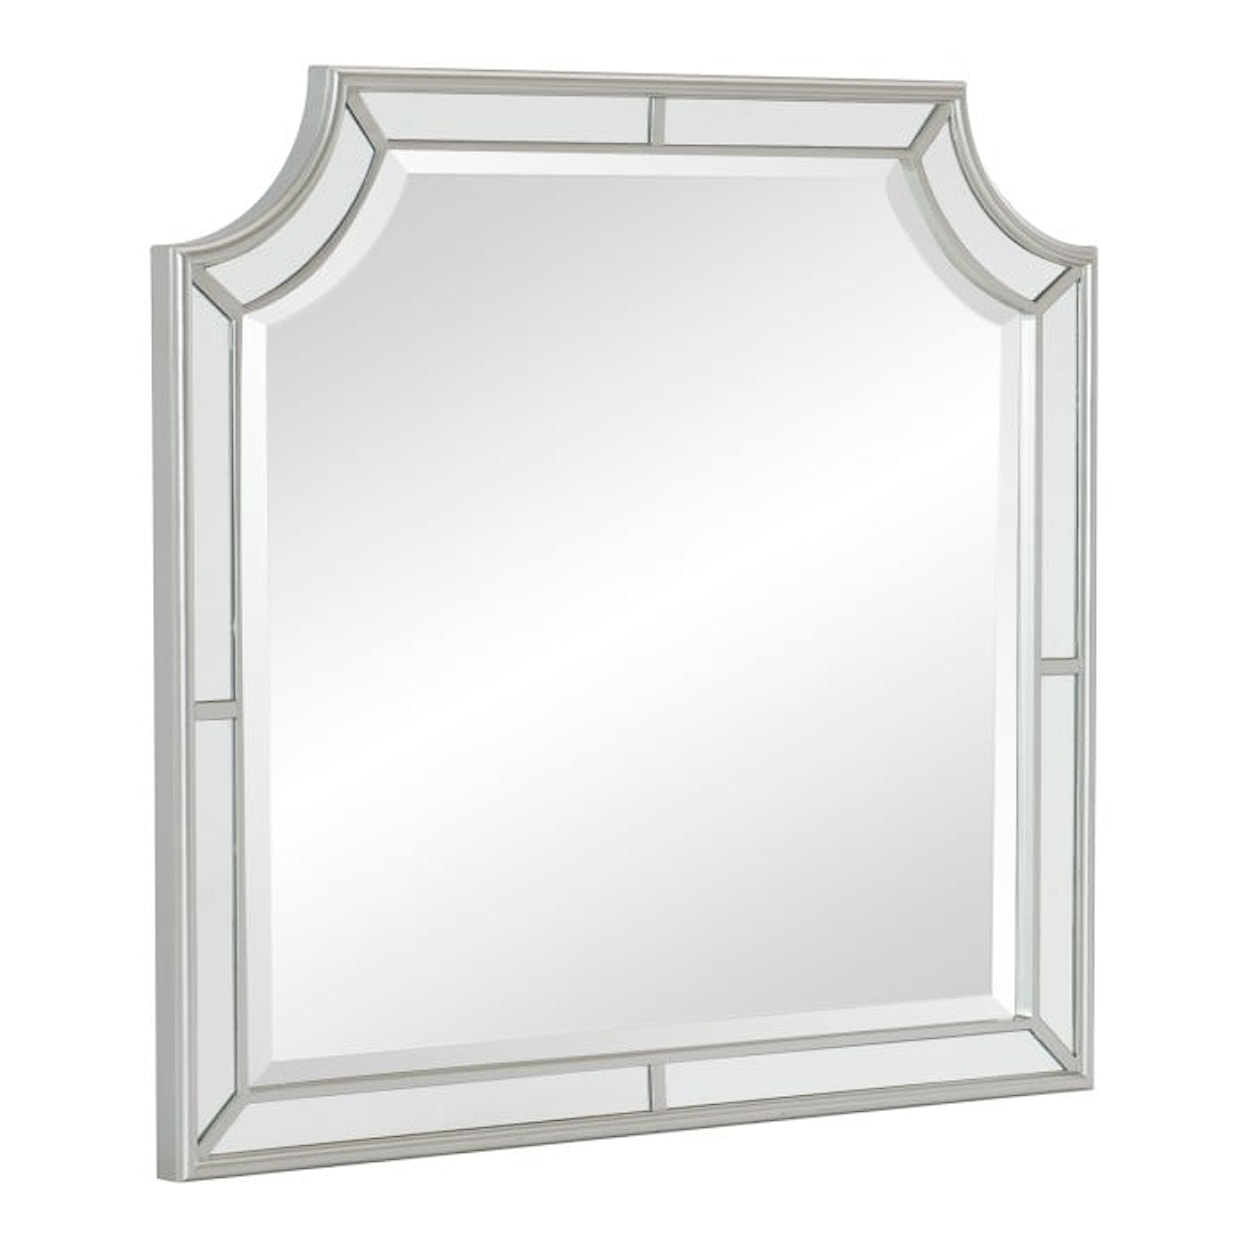 Homelegance Furniture Avondale Arched Mirror with Beveled Mirror Trim